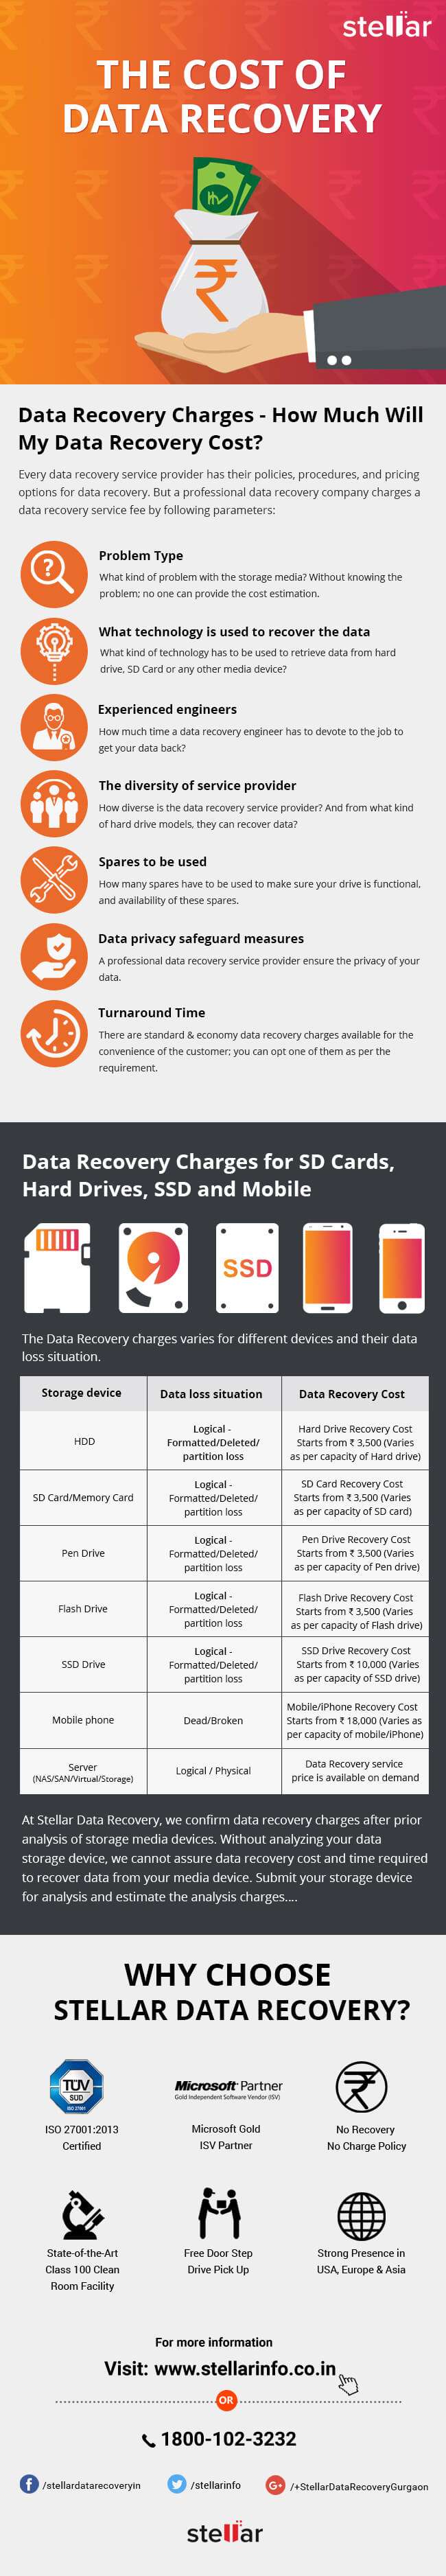 Data Recovery Cost infographic